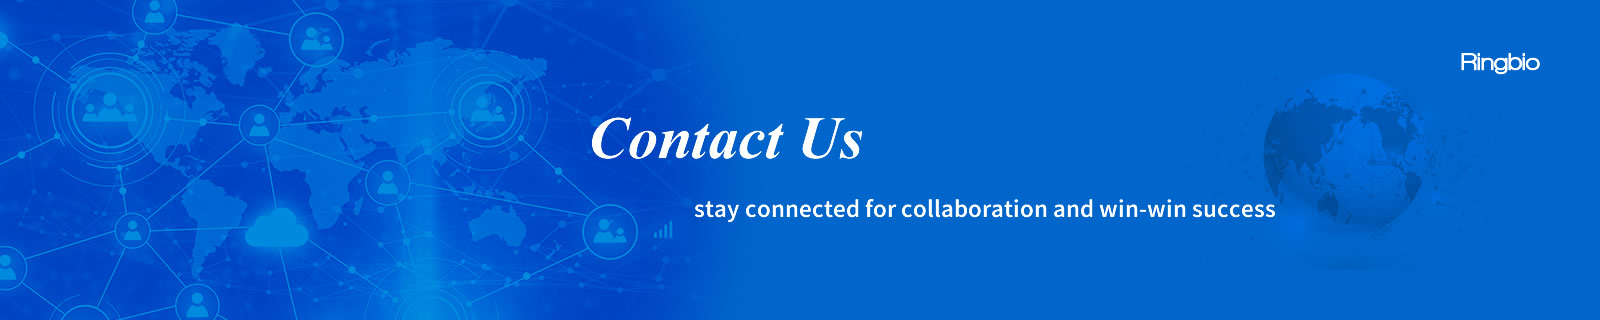 Contact us and stay connected with Ringbio